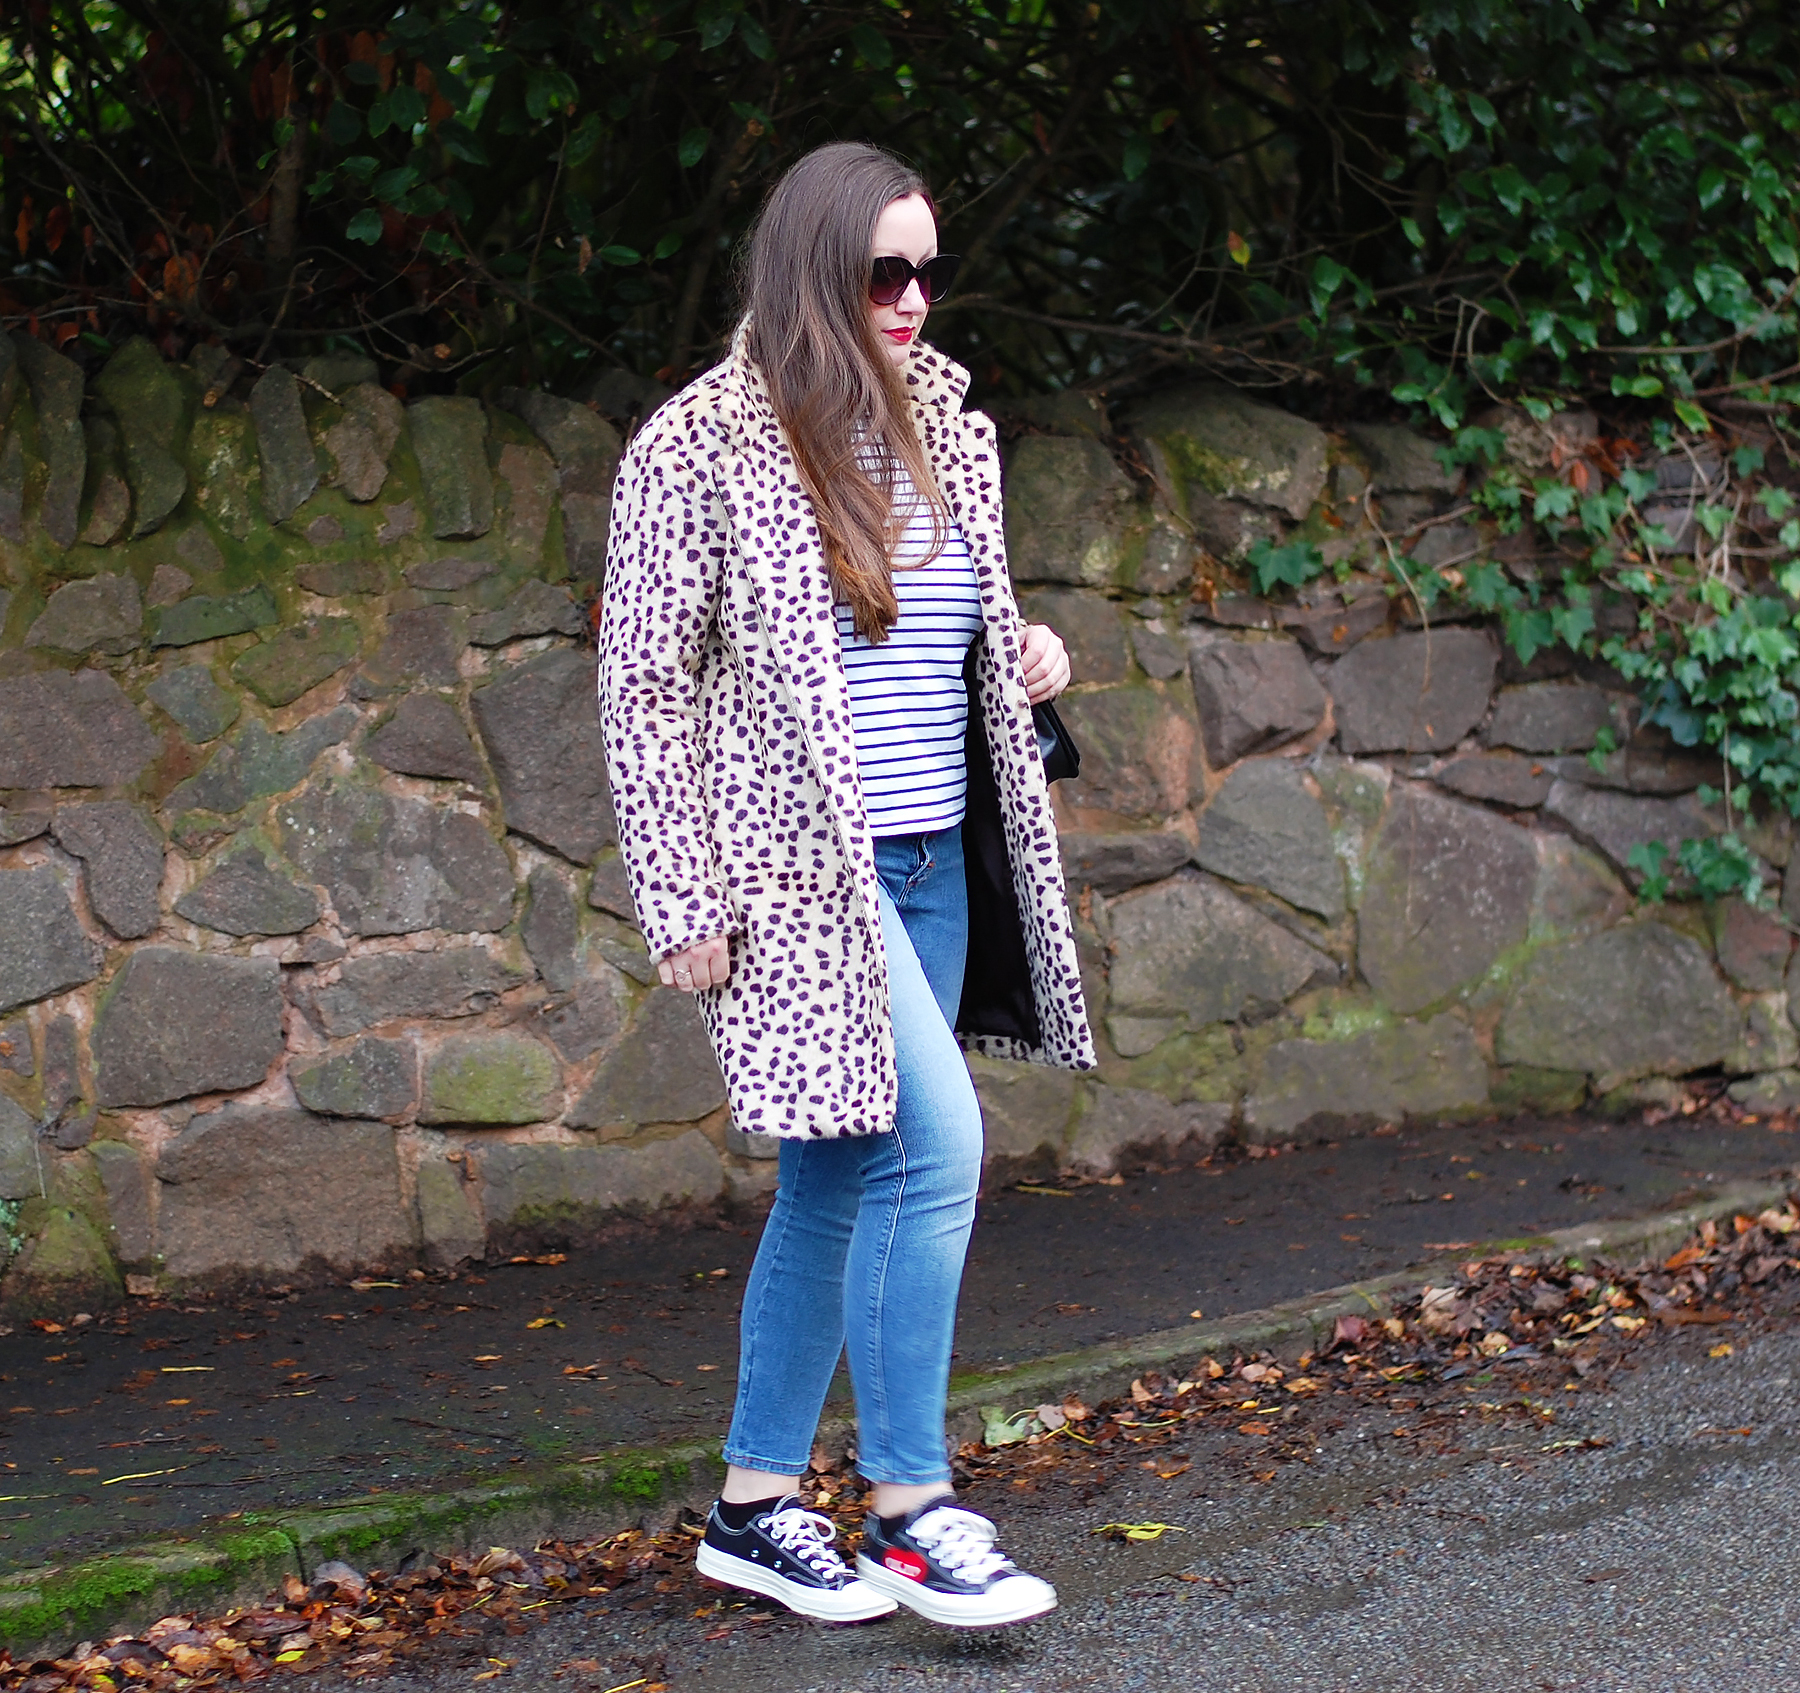 Leopard Print And Stripes Outfit